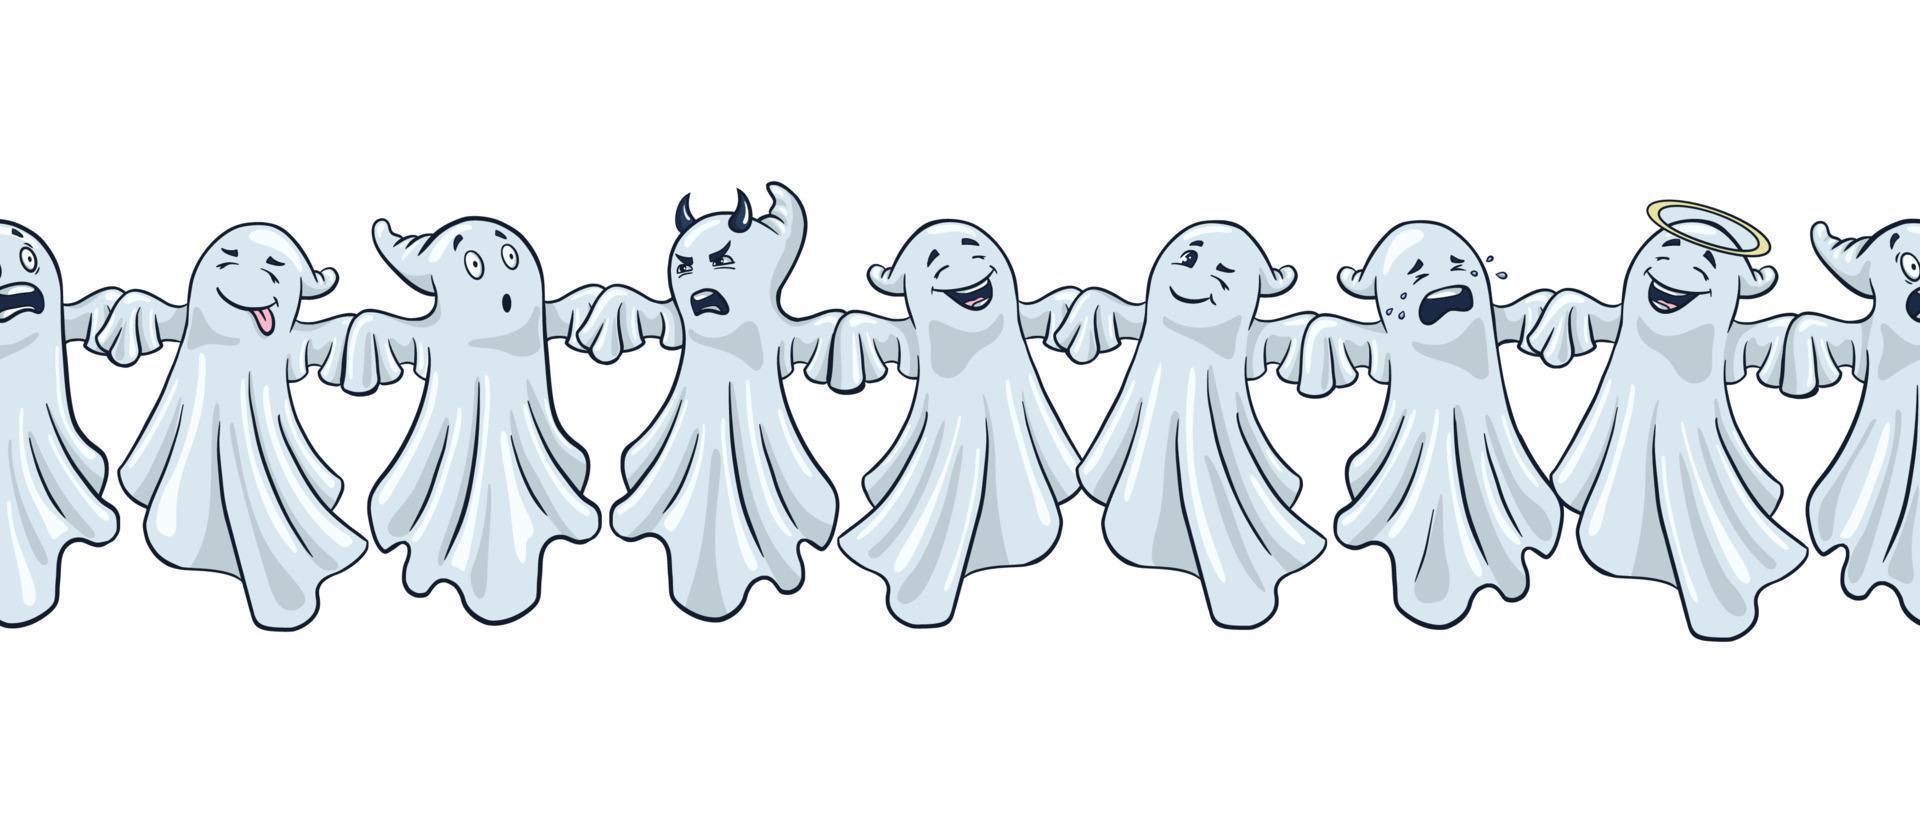 Funny Ghosts Border vector